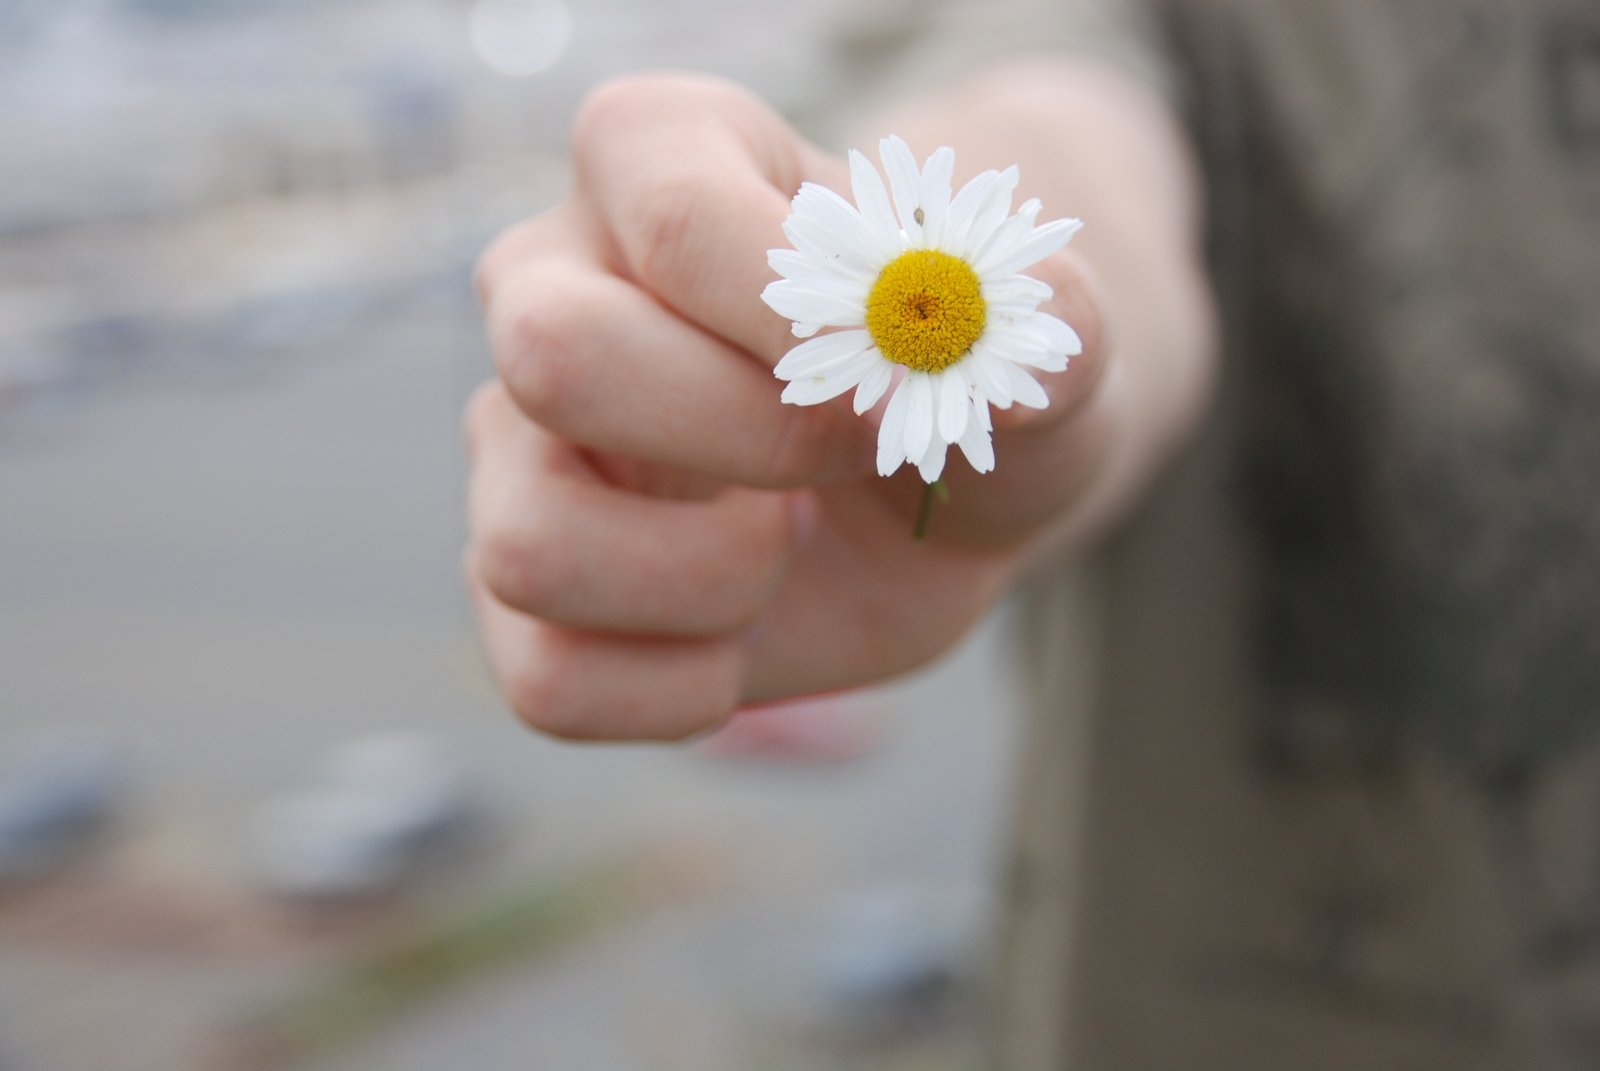 the white and yellow daisy in someone's hand is the focus